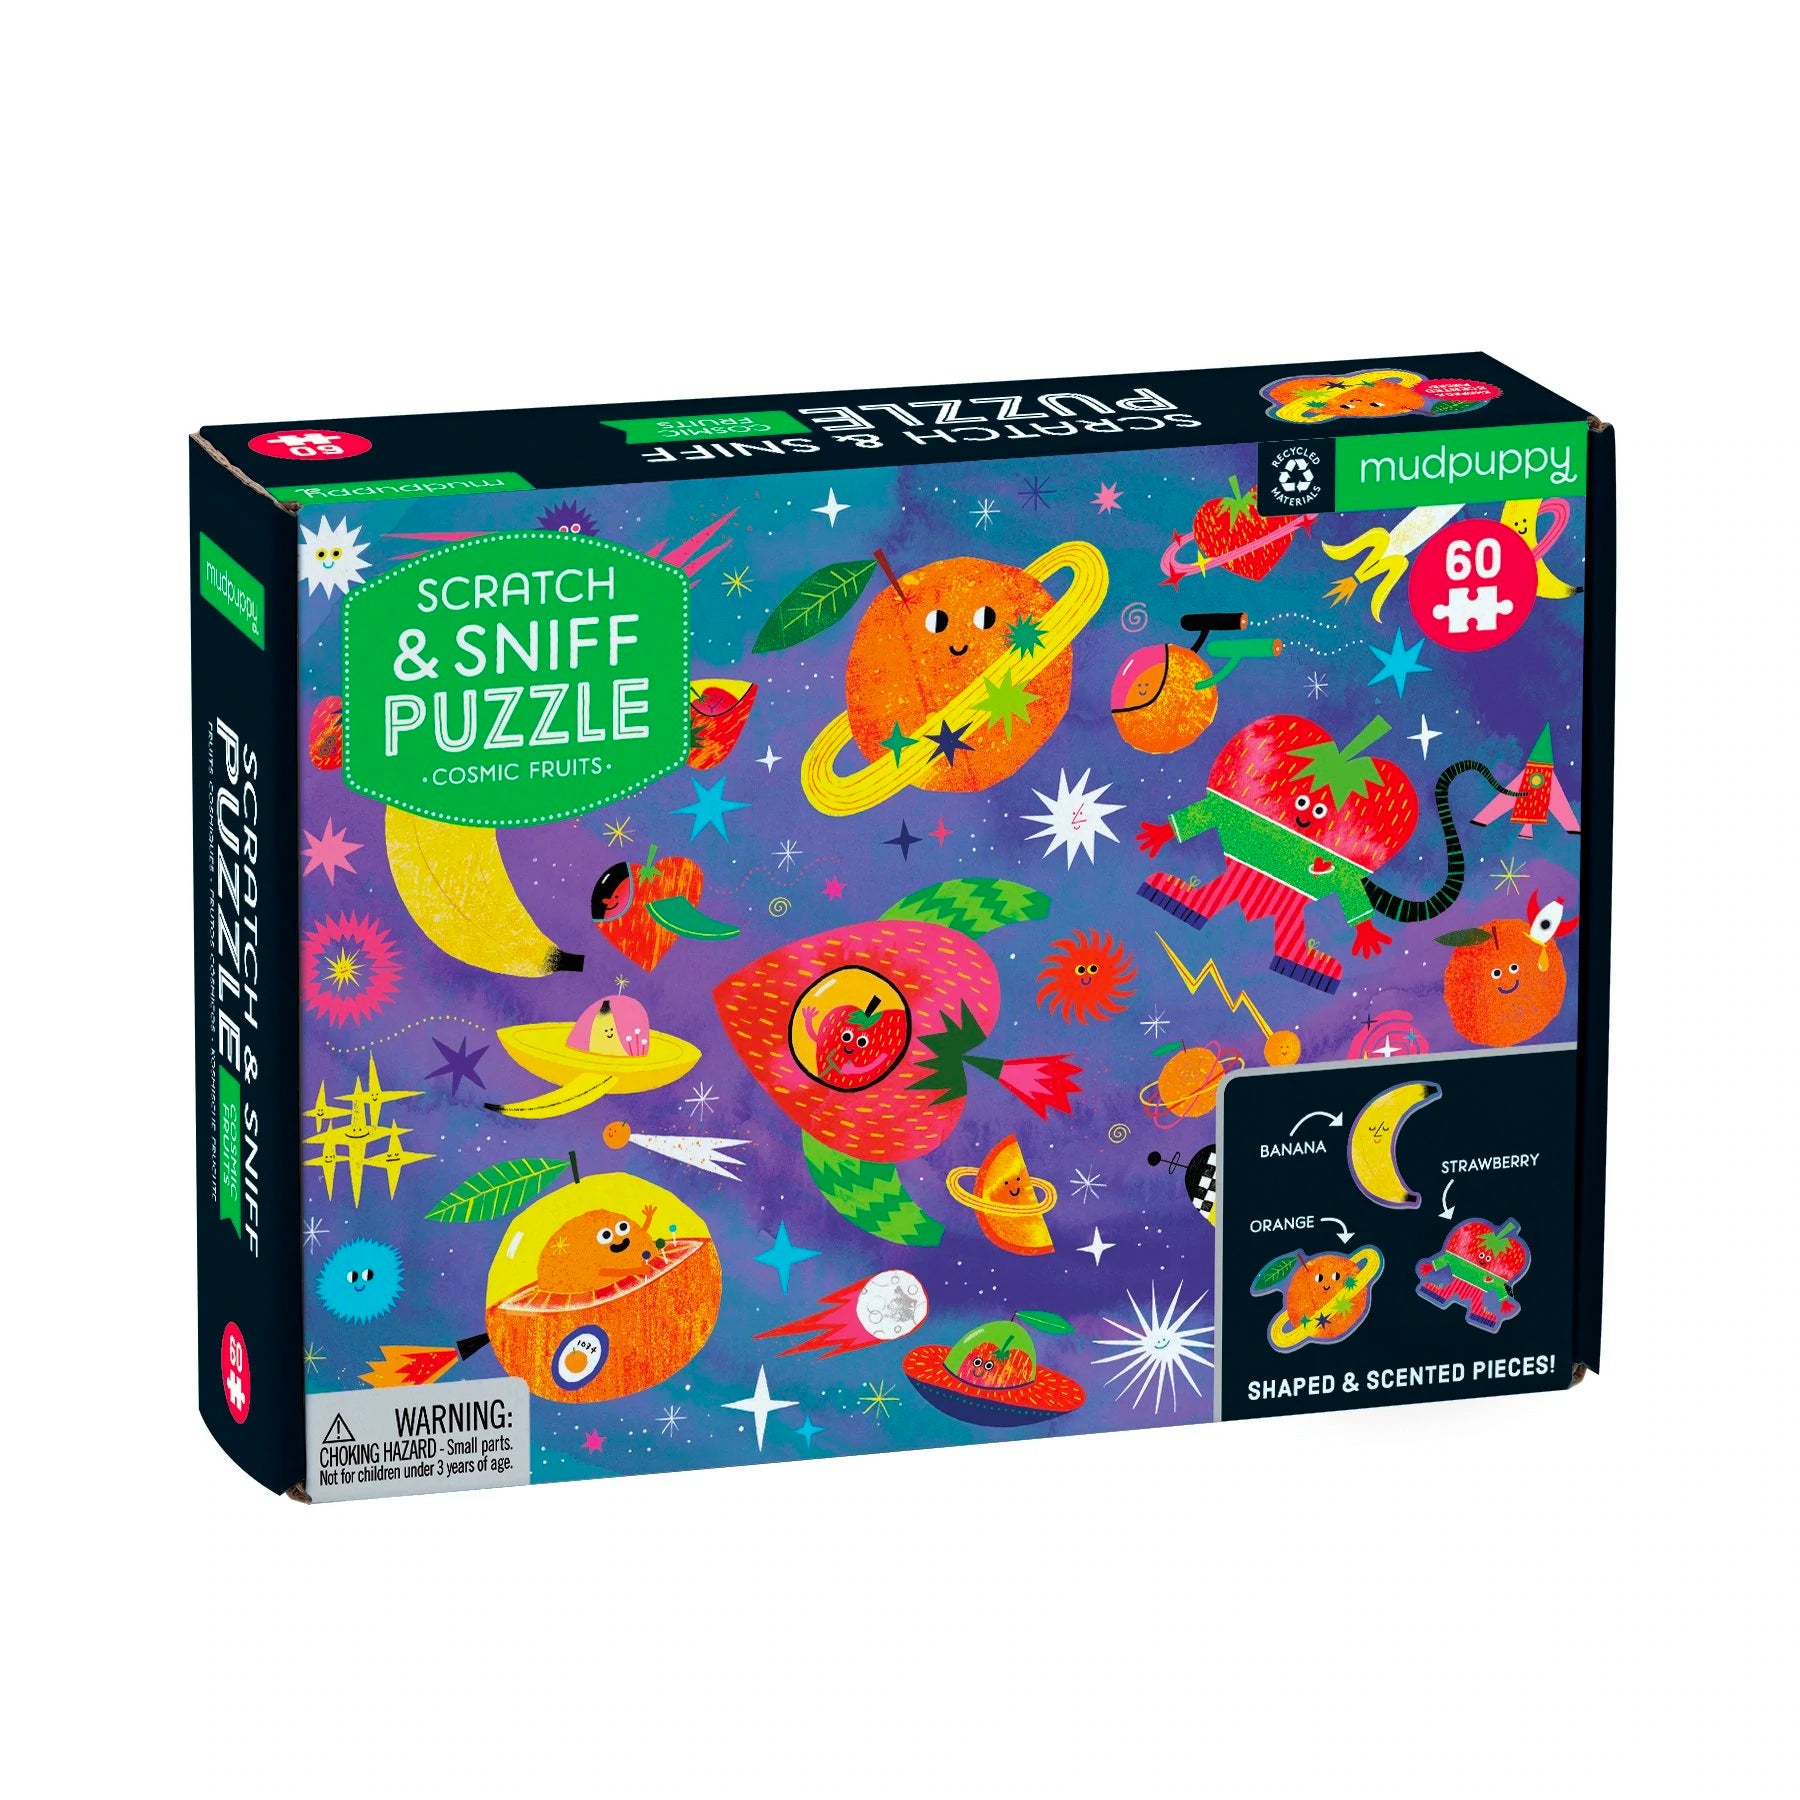 Scratch and Sniff Puzzles: Cosmic Fruits